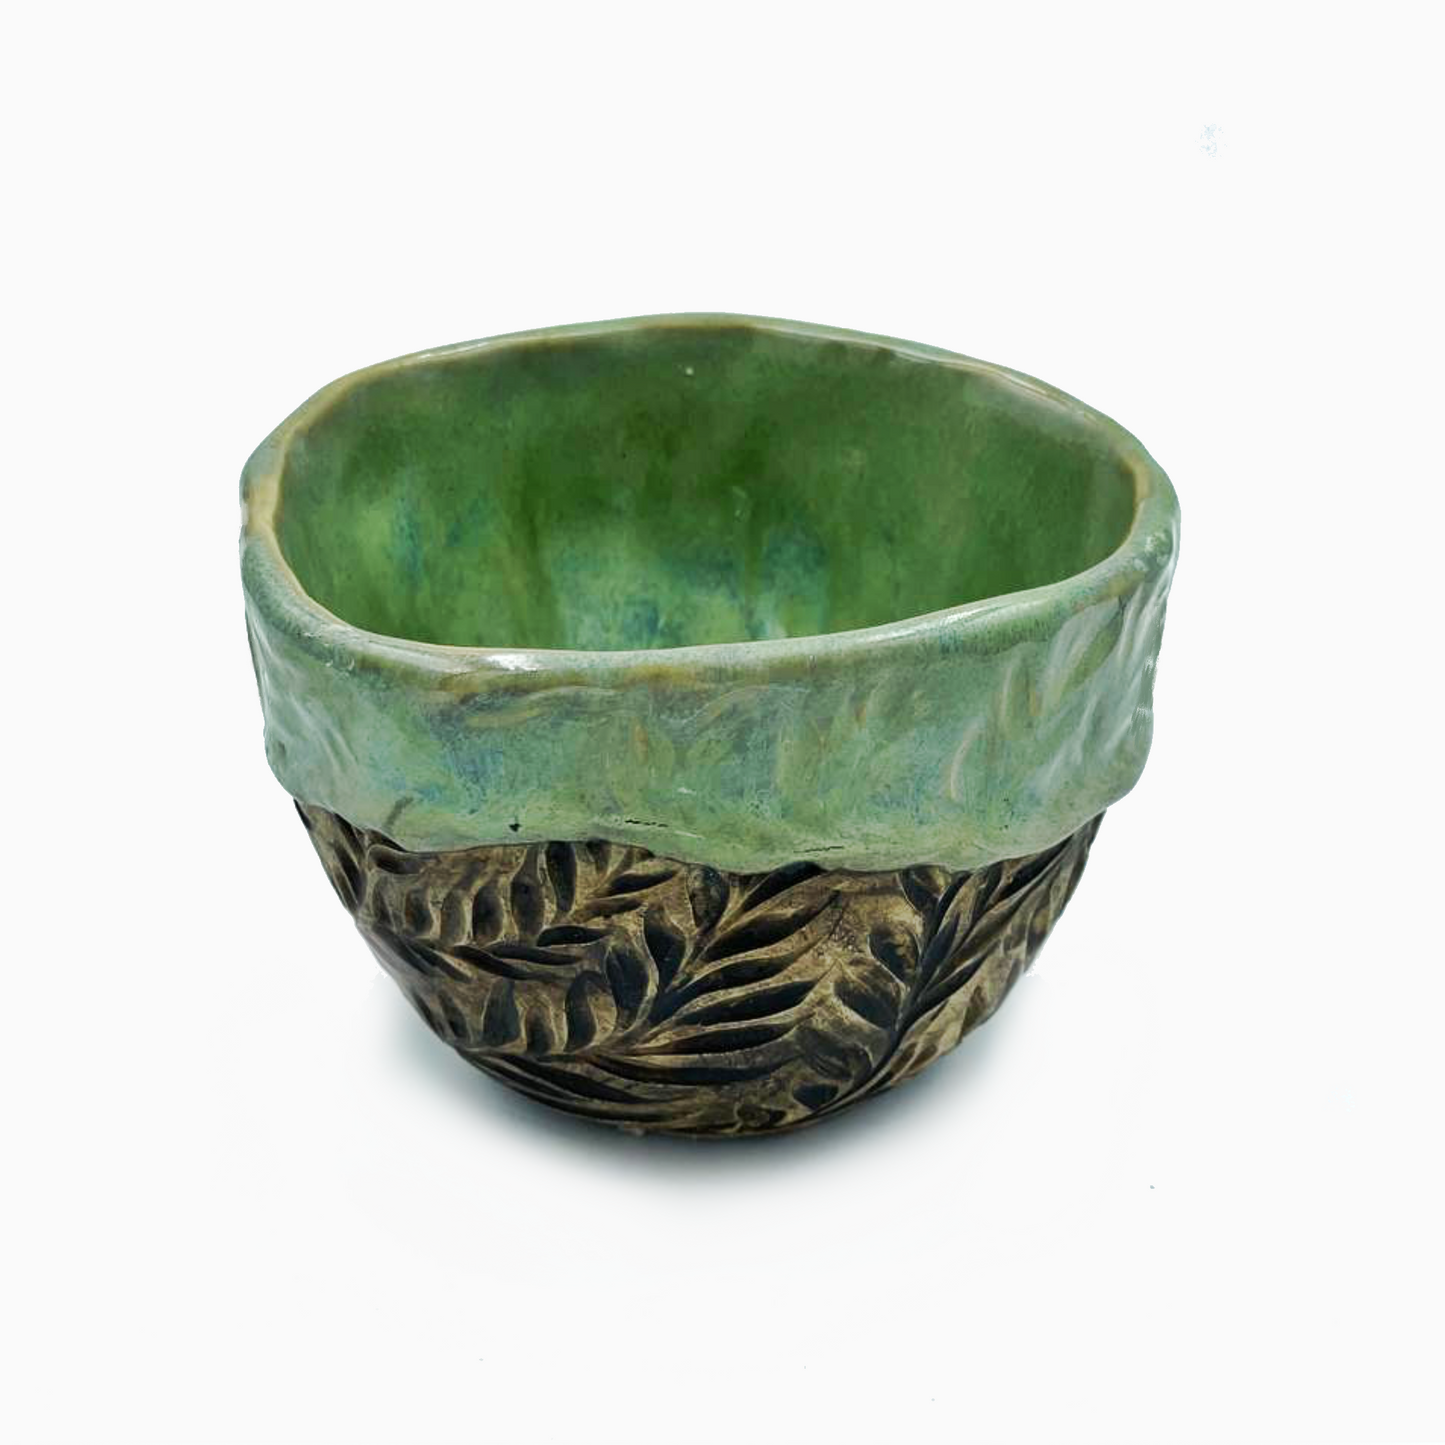 Secret of the Woods - Green Cup with Fern Pattern